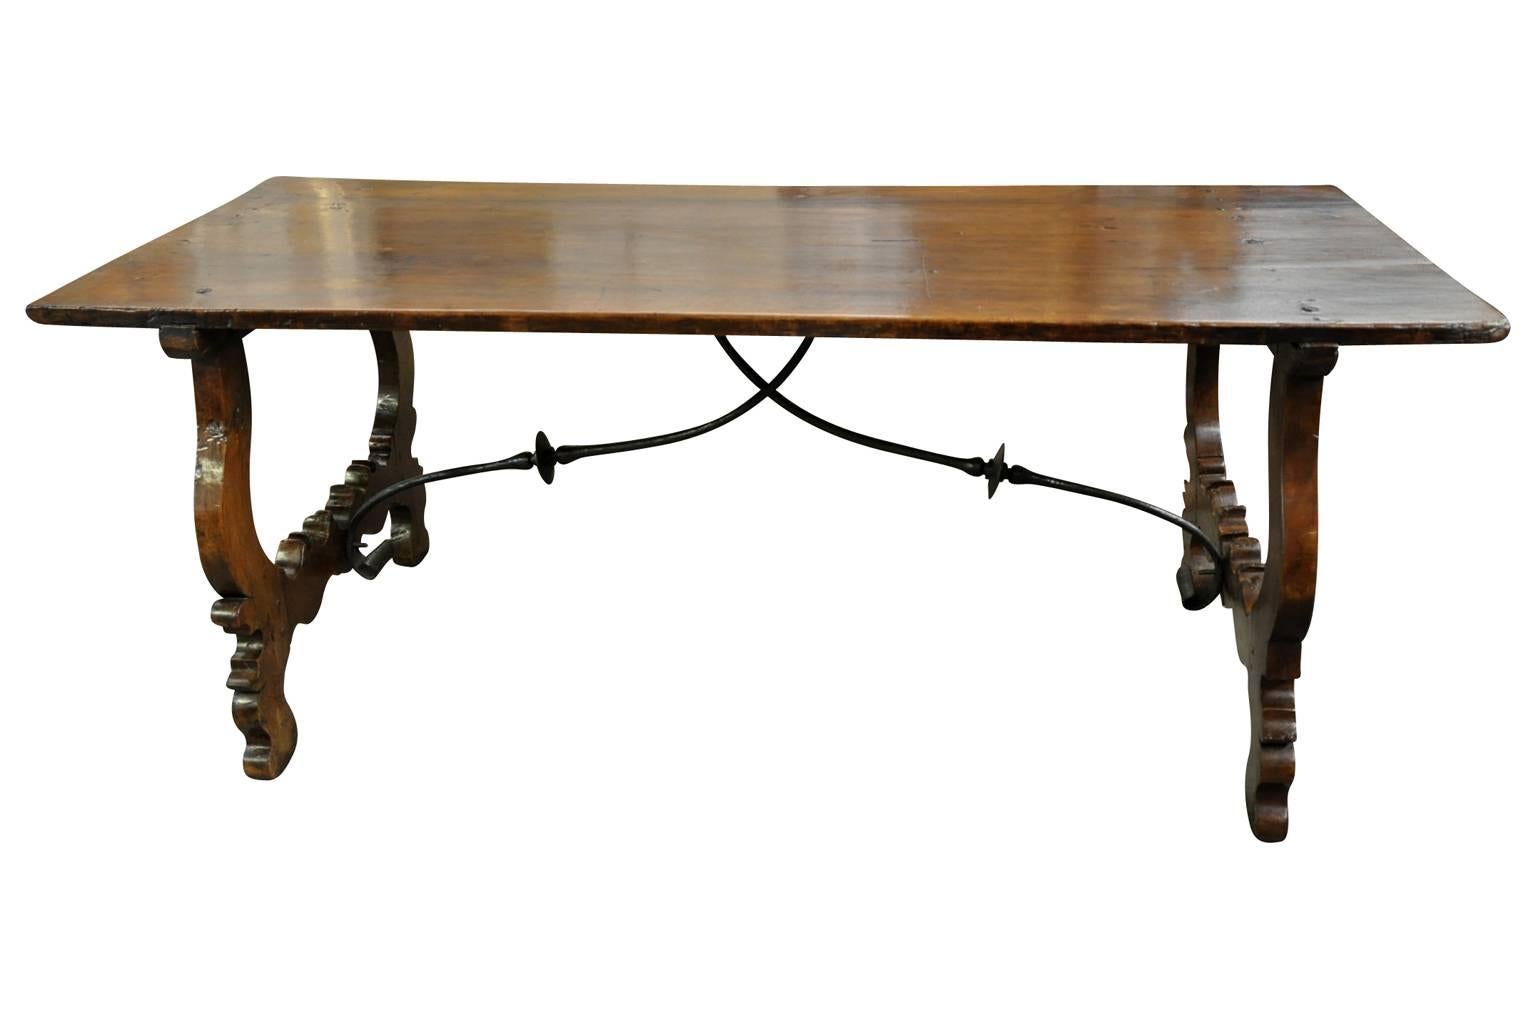 A very beautiful 18th century dining table from Spain. Masterfully constructed from stunning walnut and hand forged iron stretchers, classical lyre shaped legs. Wonderful patina. Terrific not only as a dining table, but will serve beautifully as a